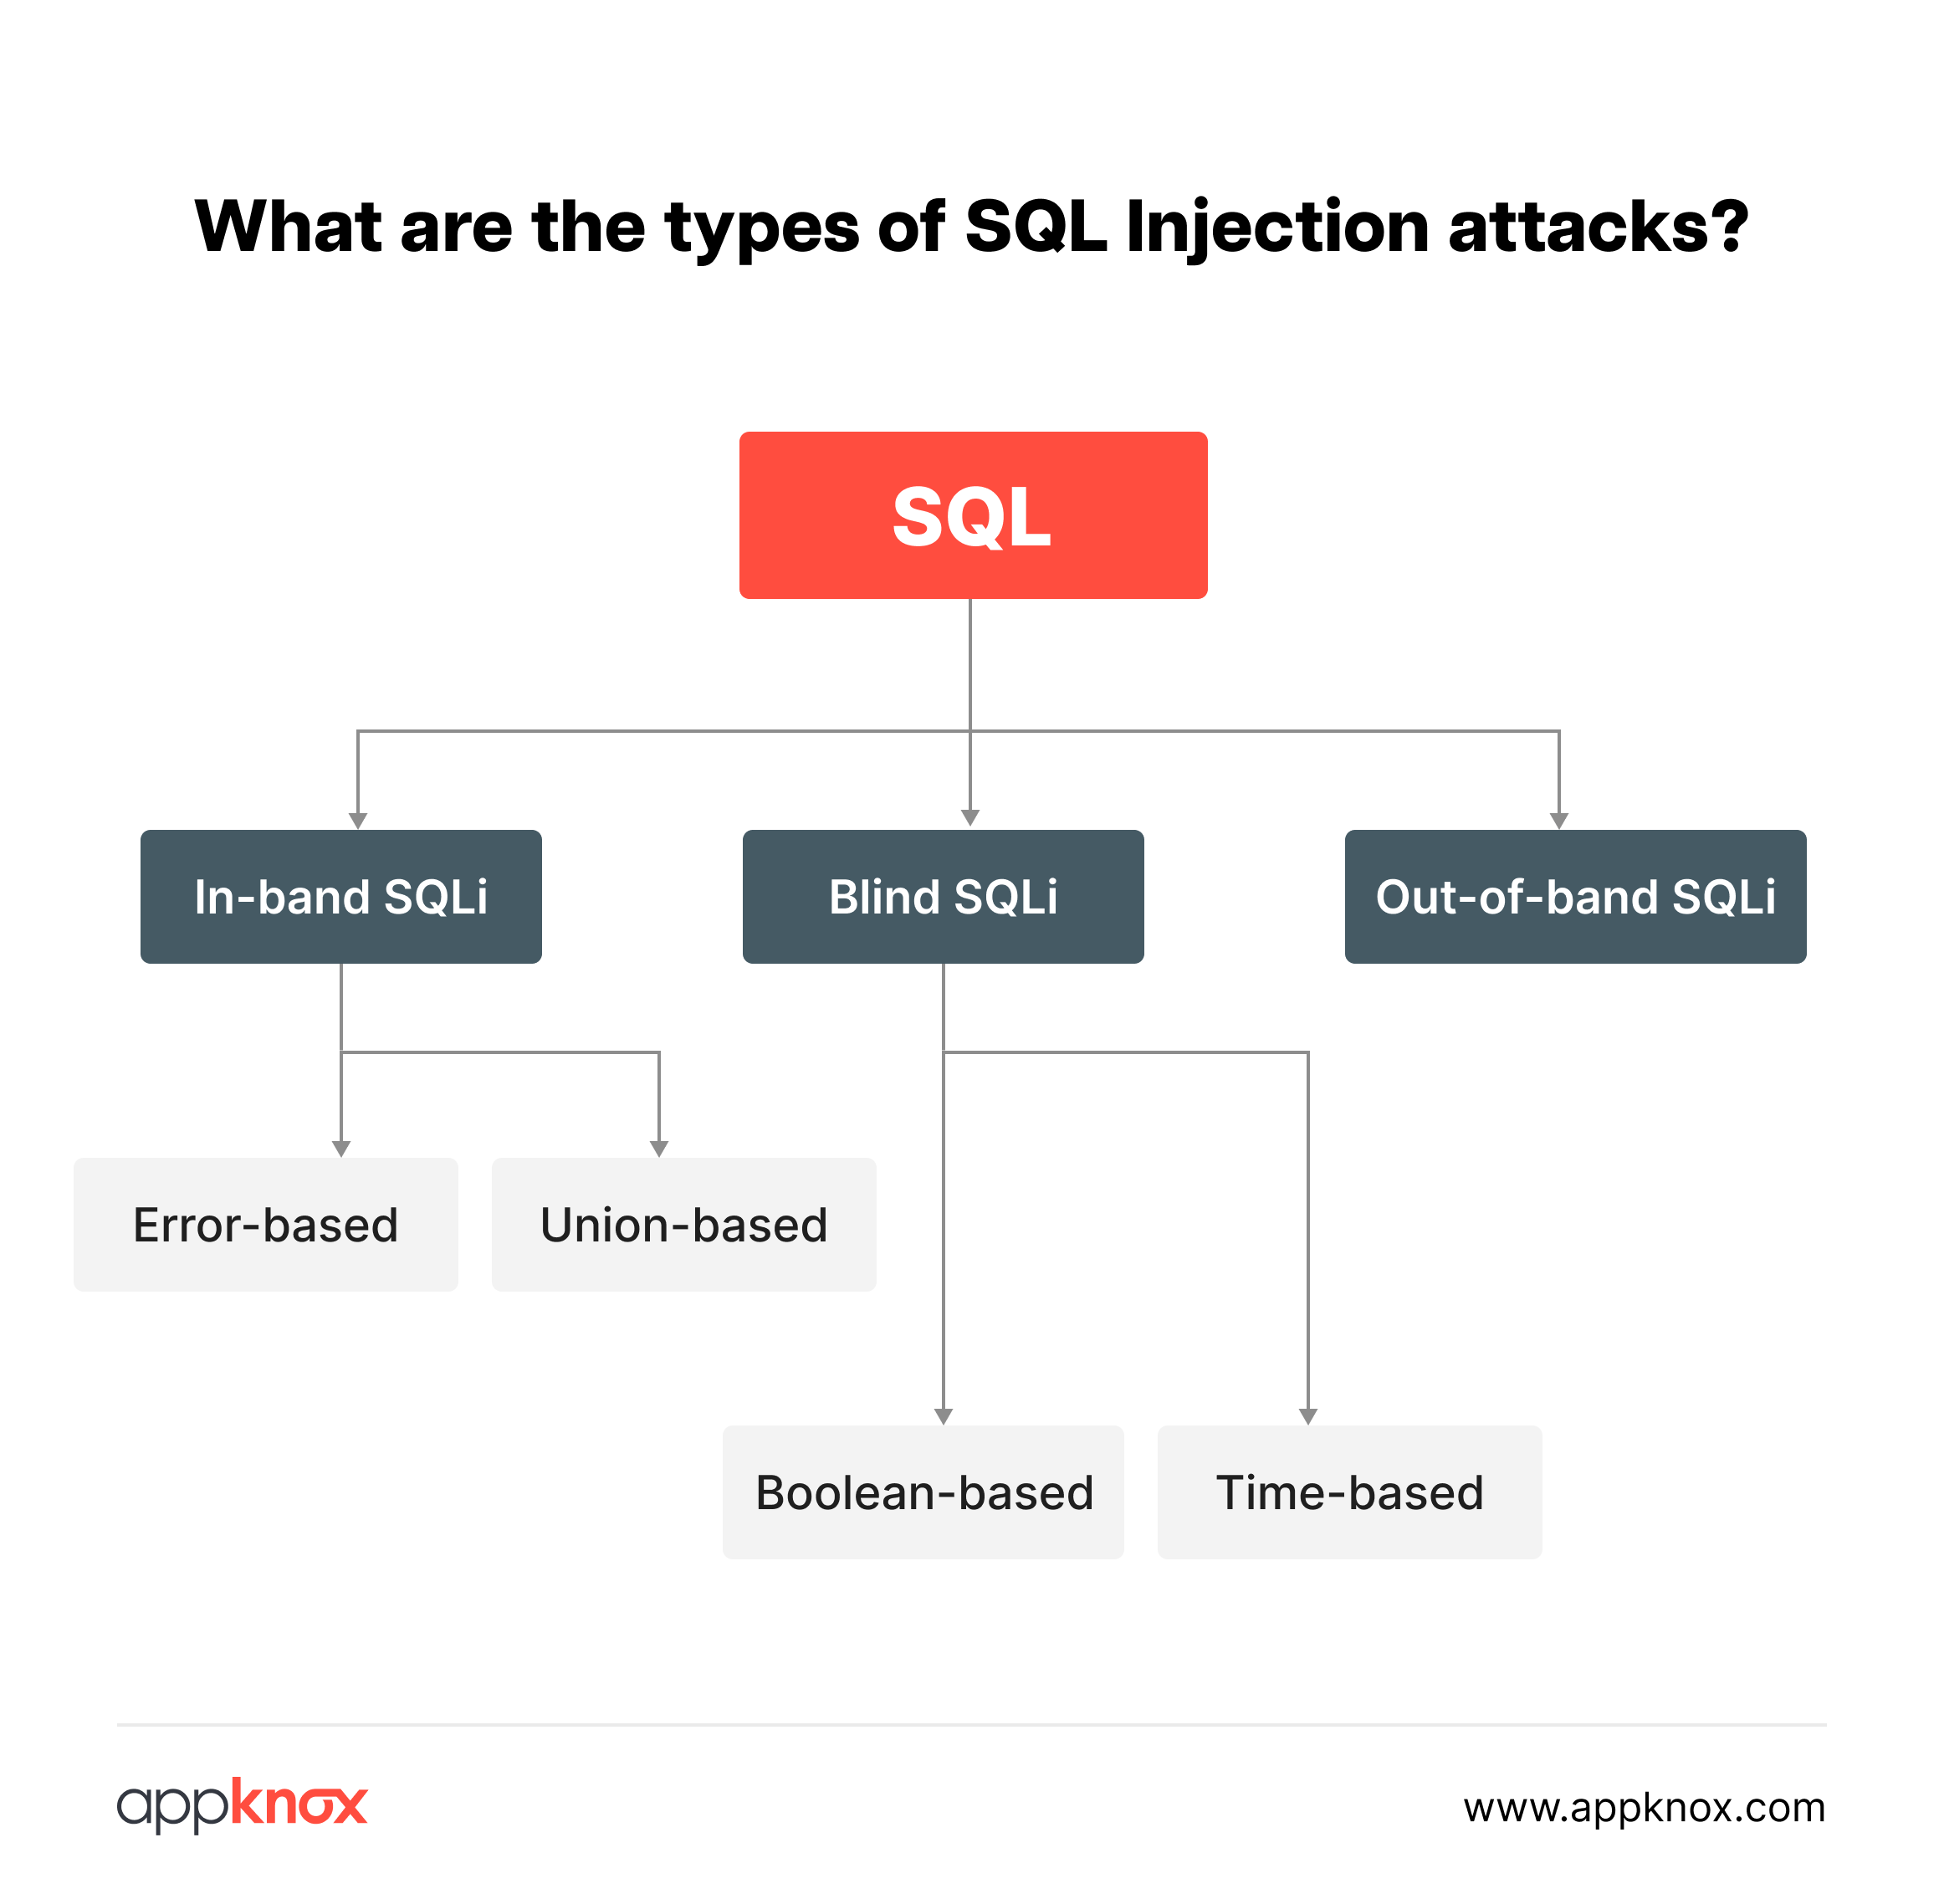 The three major types of SQL Injection attacks: in-band, Blind, and Out-of-band